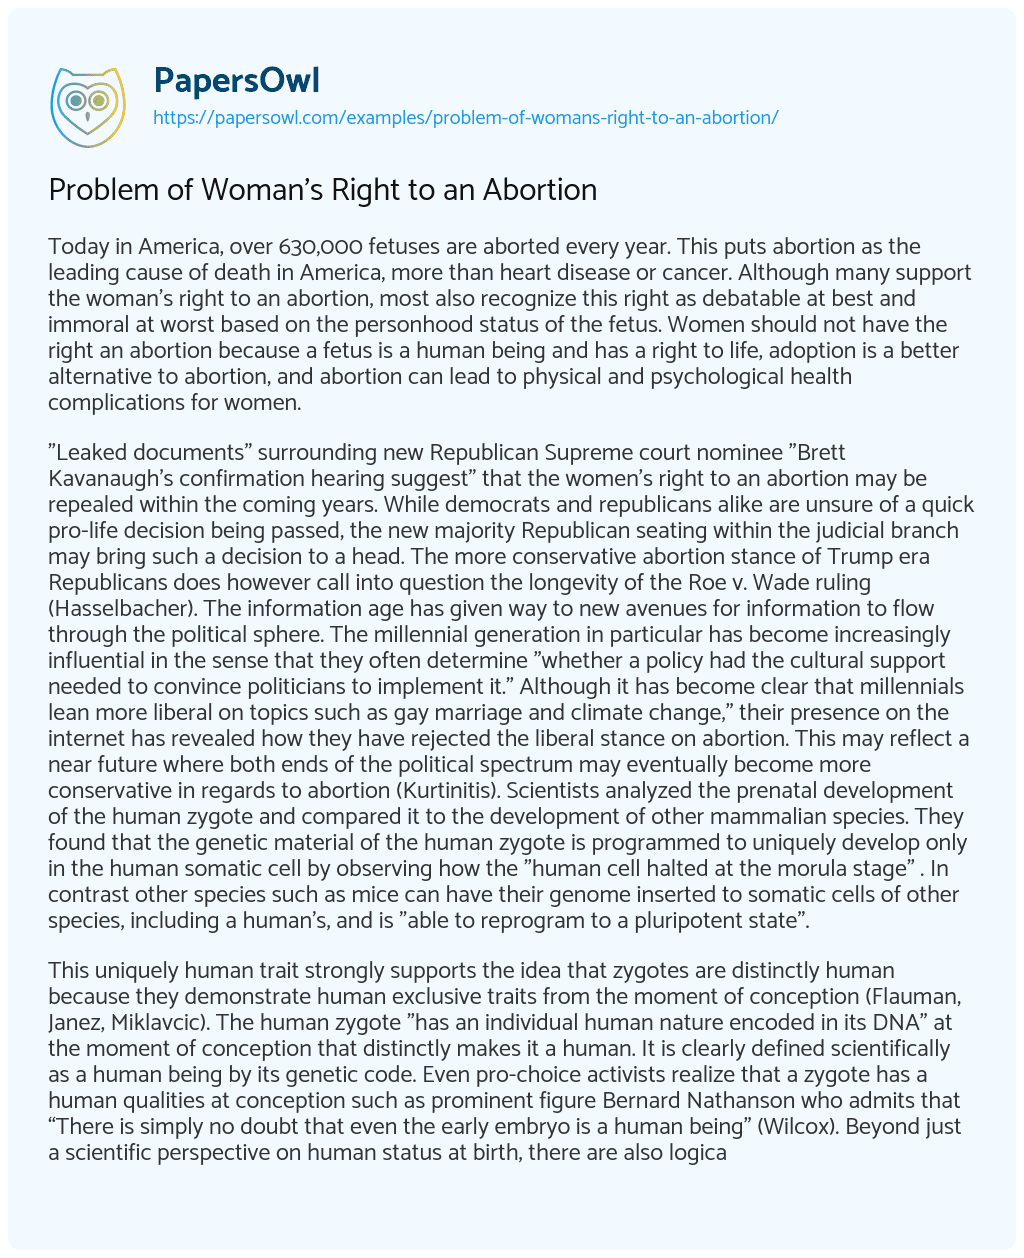 Essay on Problem of Woman’s Right to an Abortion